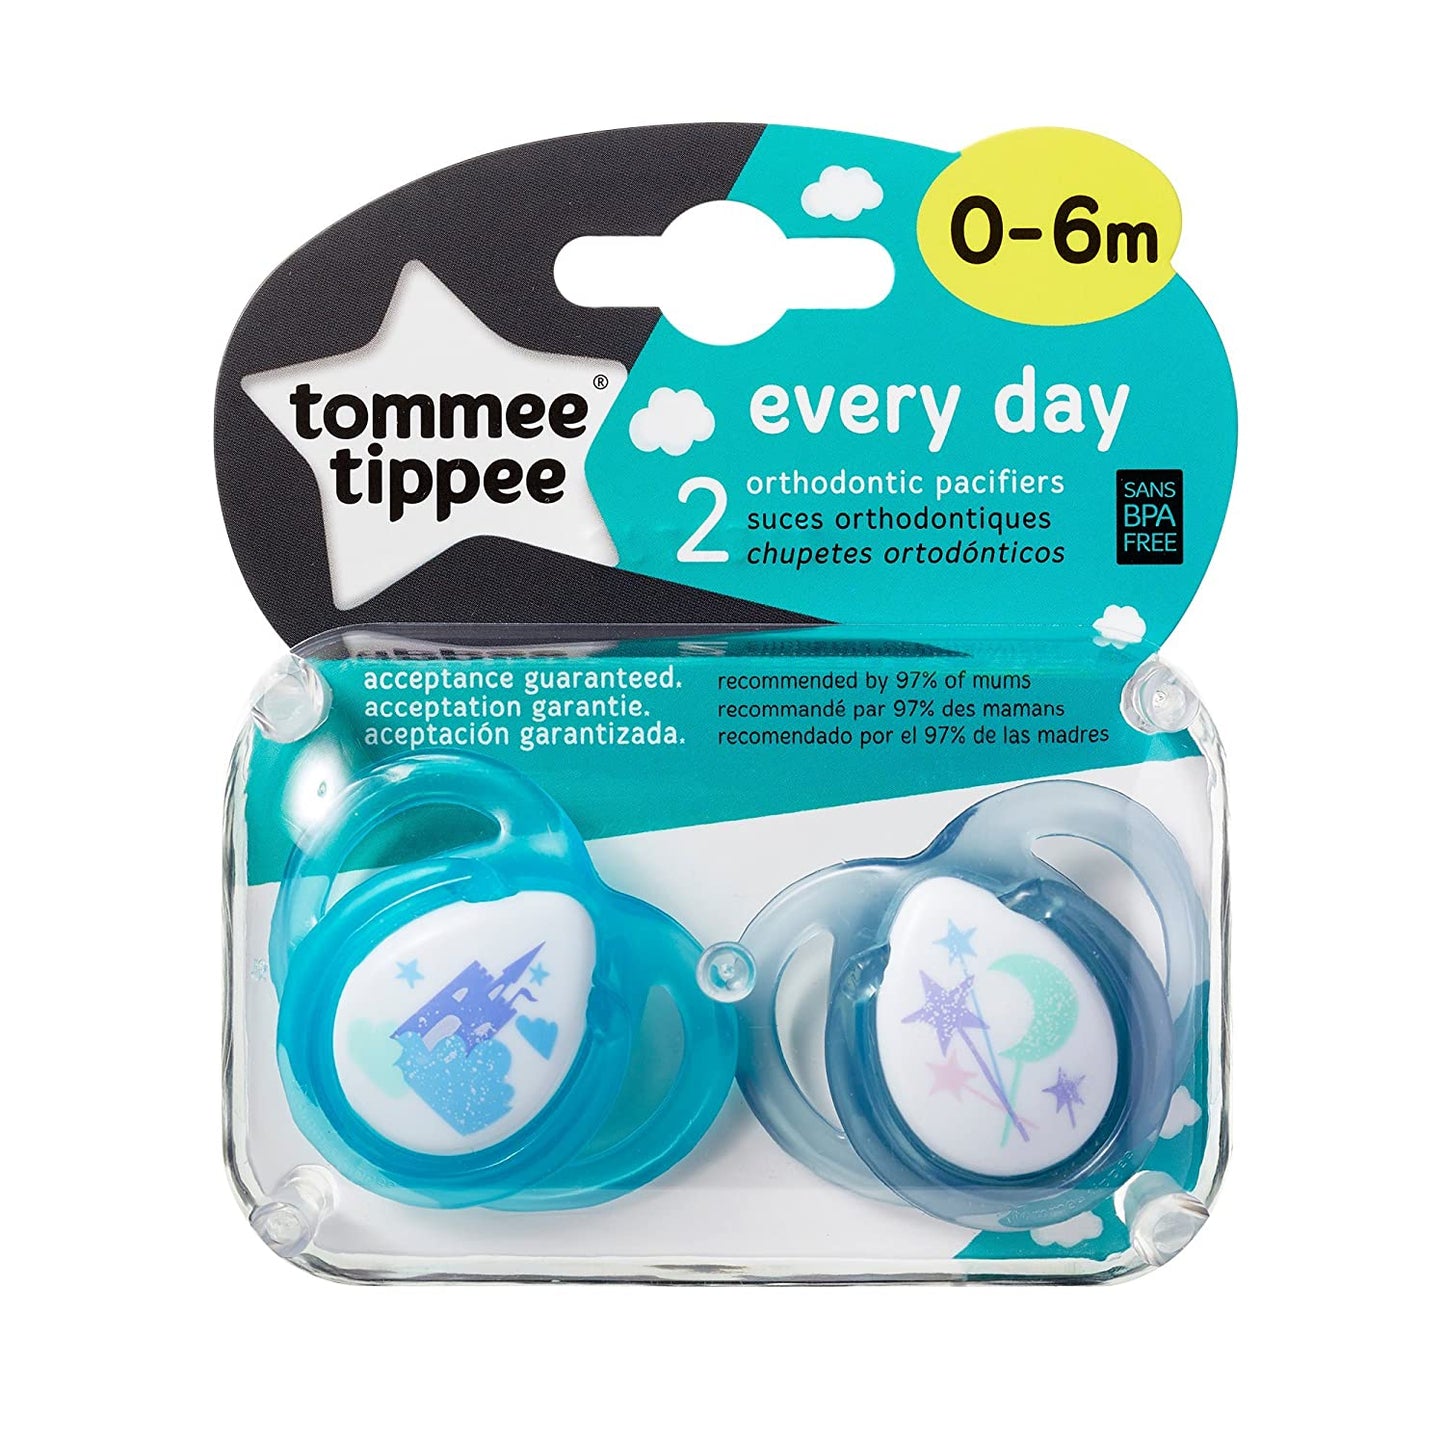 Tommee Tippee Closer to Natire Everyday Pacifier, BPA-Free, Bottle Shaped Nipple, 0-6 Months, 2 Count (DESIGNS MAY VARY) - Hatke